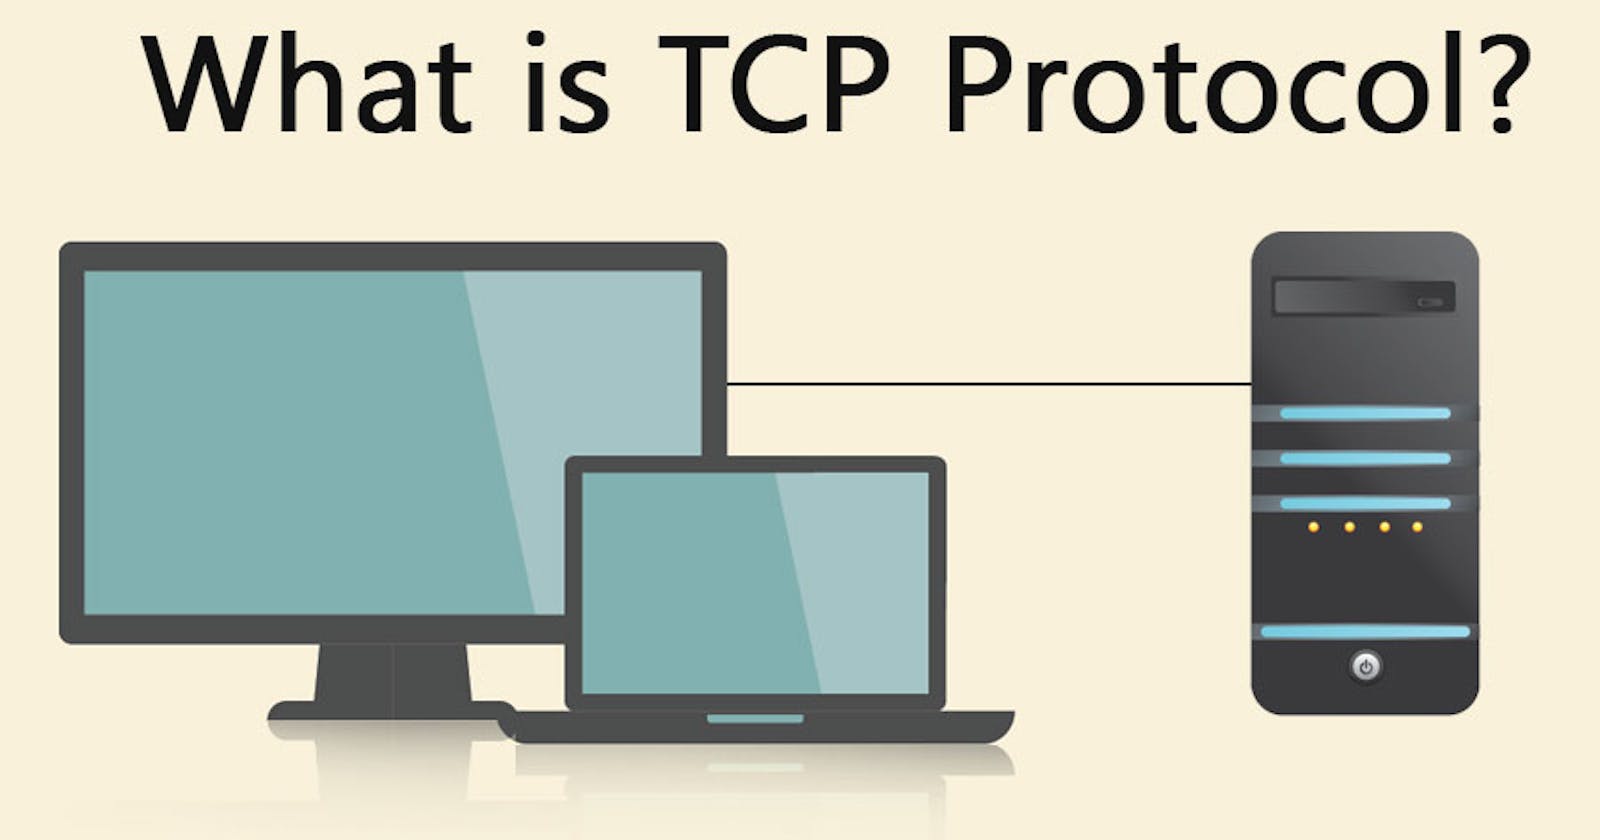 What Is Tcp?